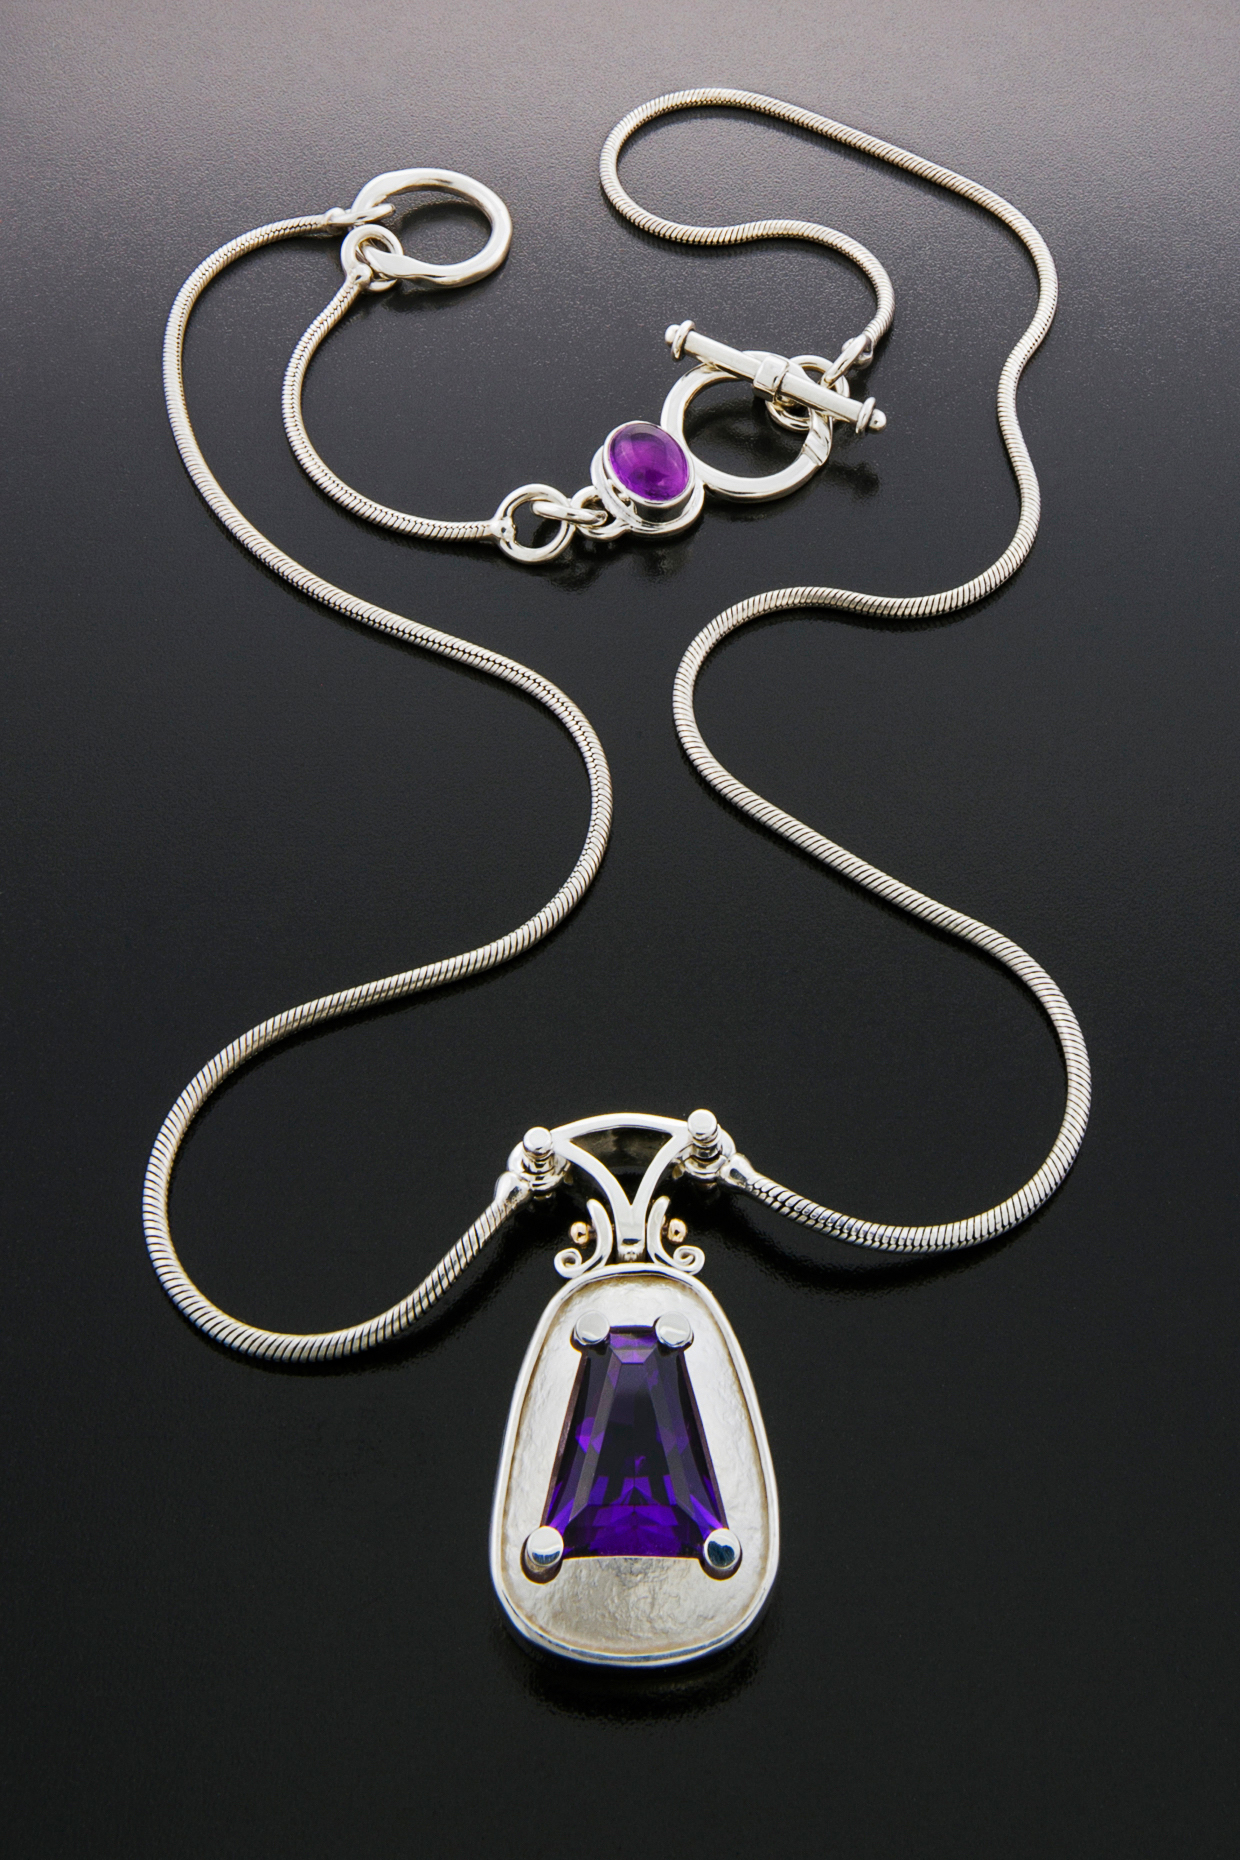 Custom necklace by craftsman, artisan and metalsmith, Todd Tychewicz